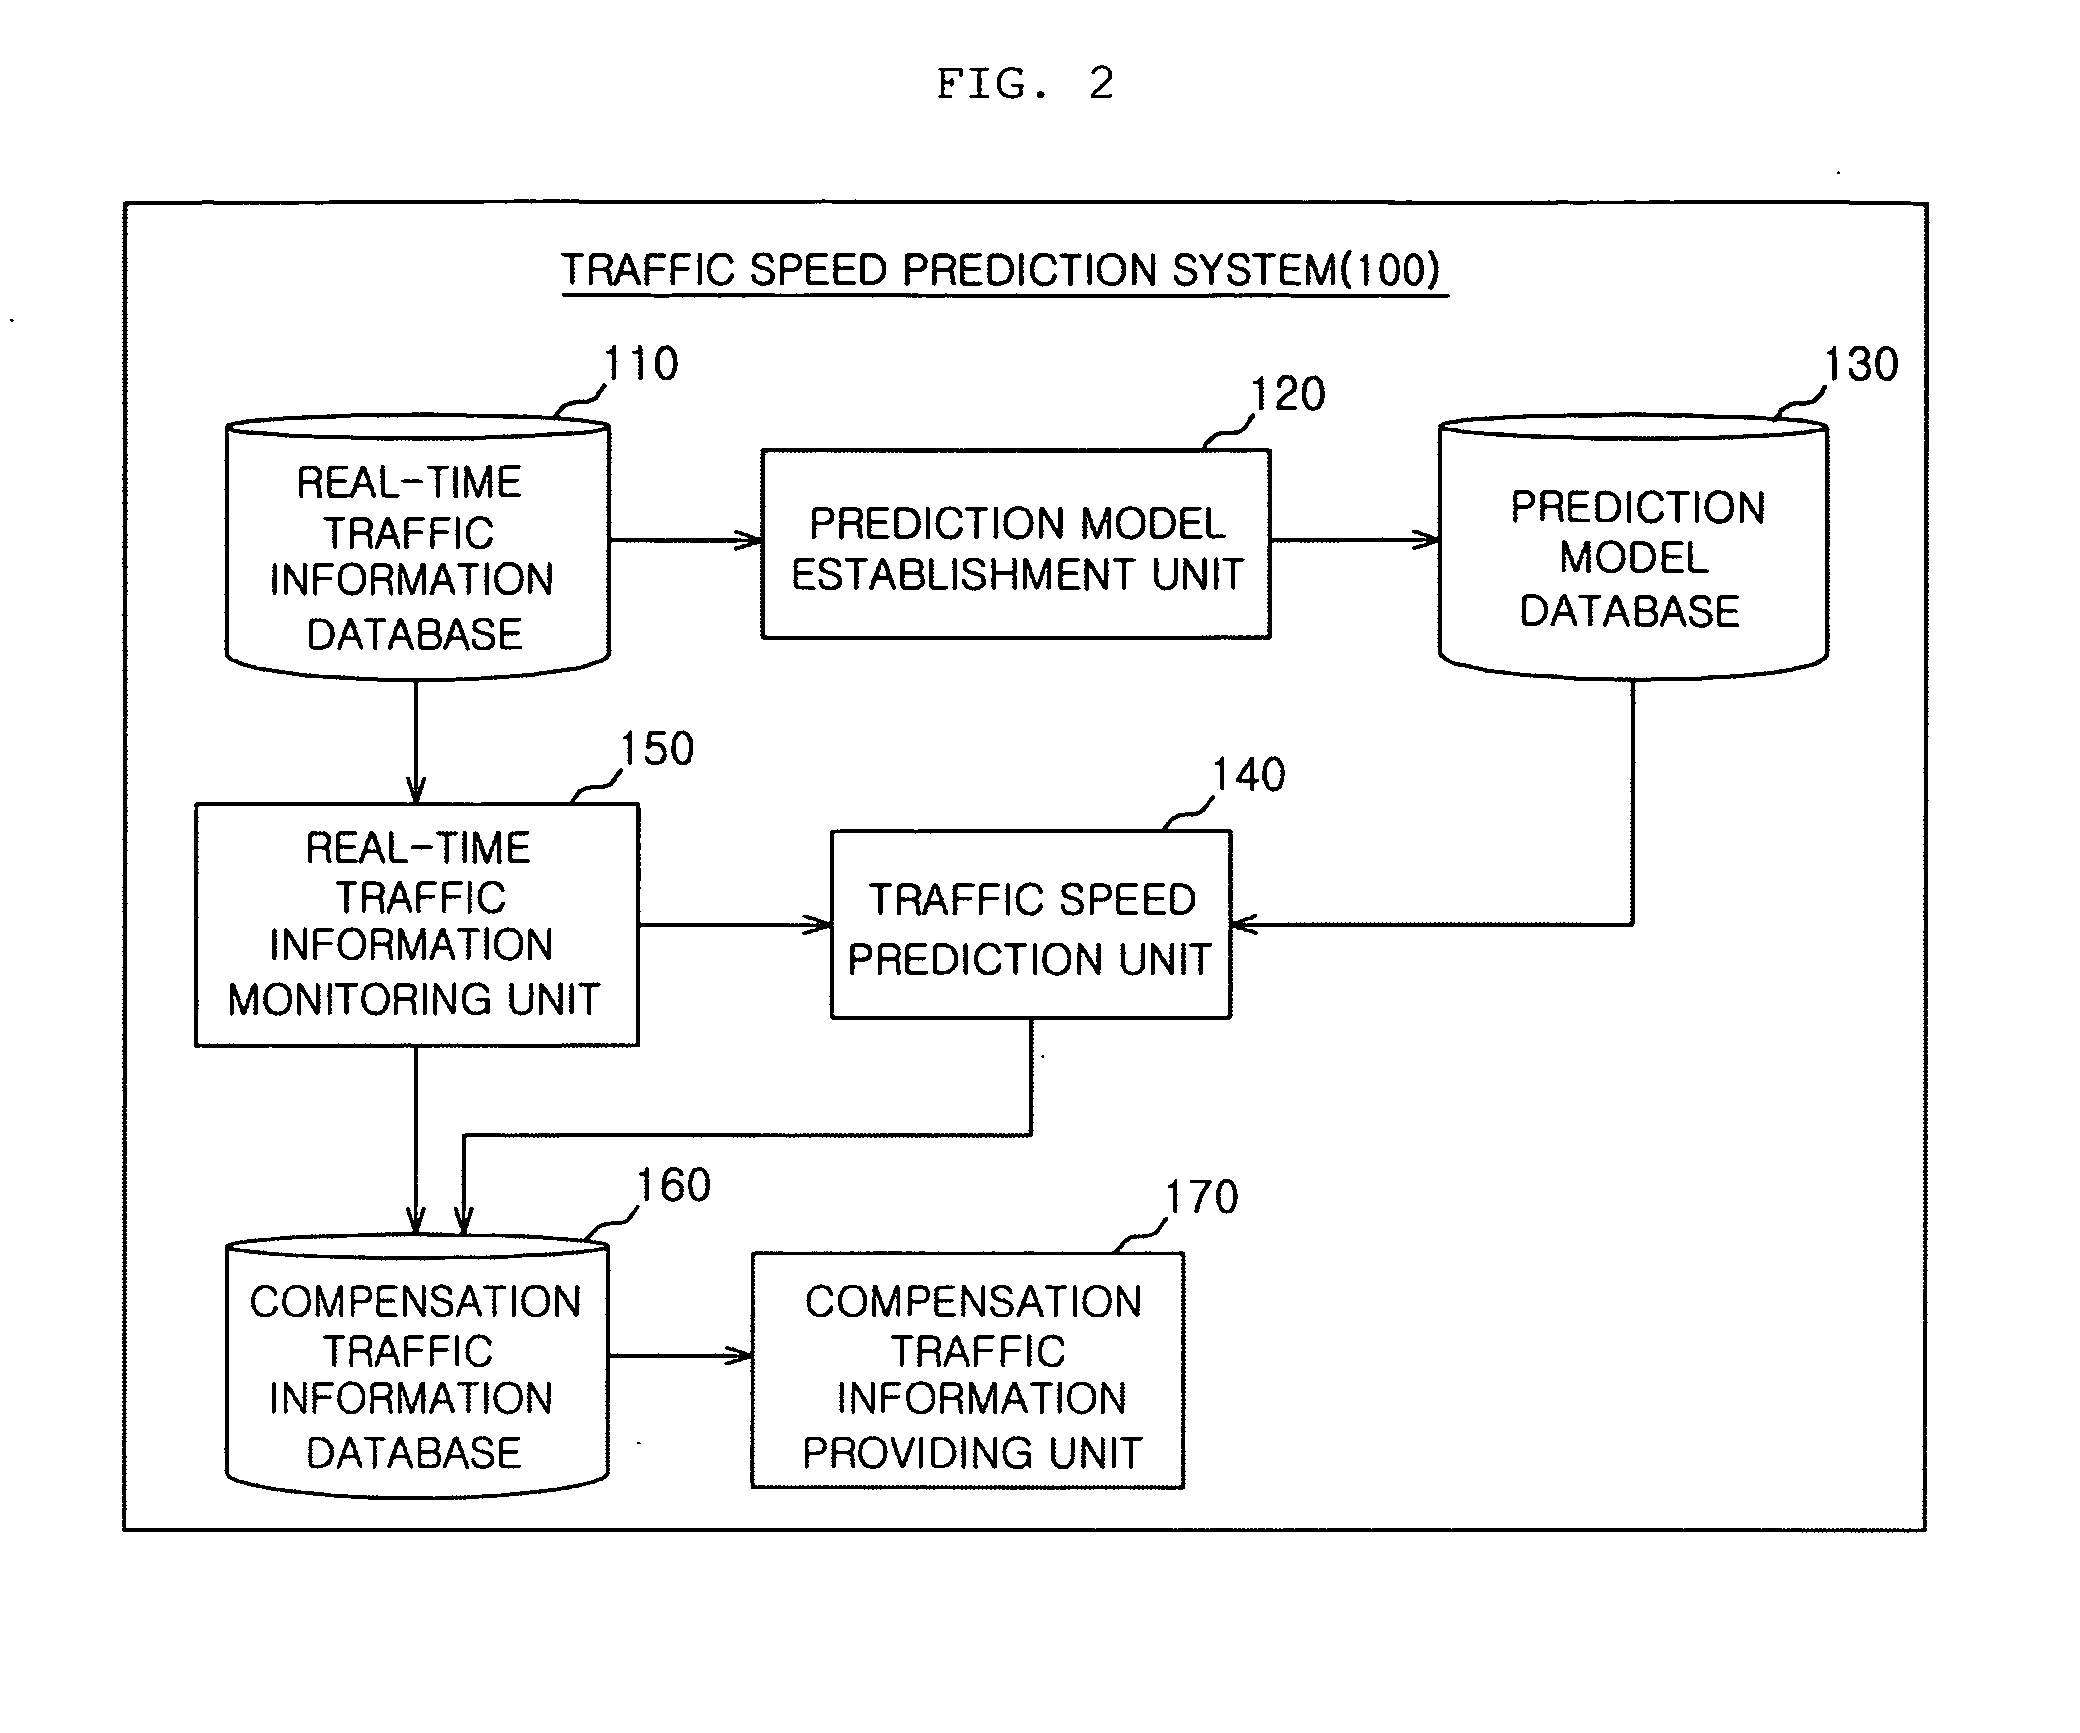 System and method of predicting traffic speed based on speed of neighboring link